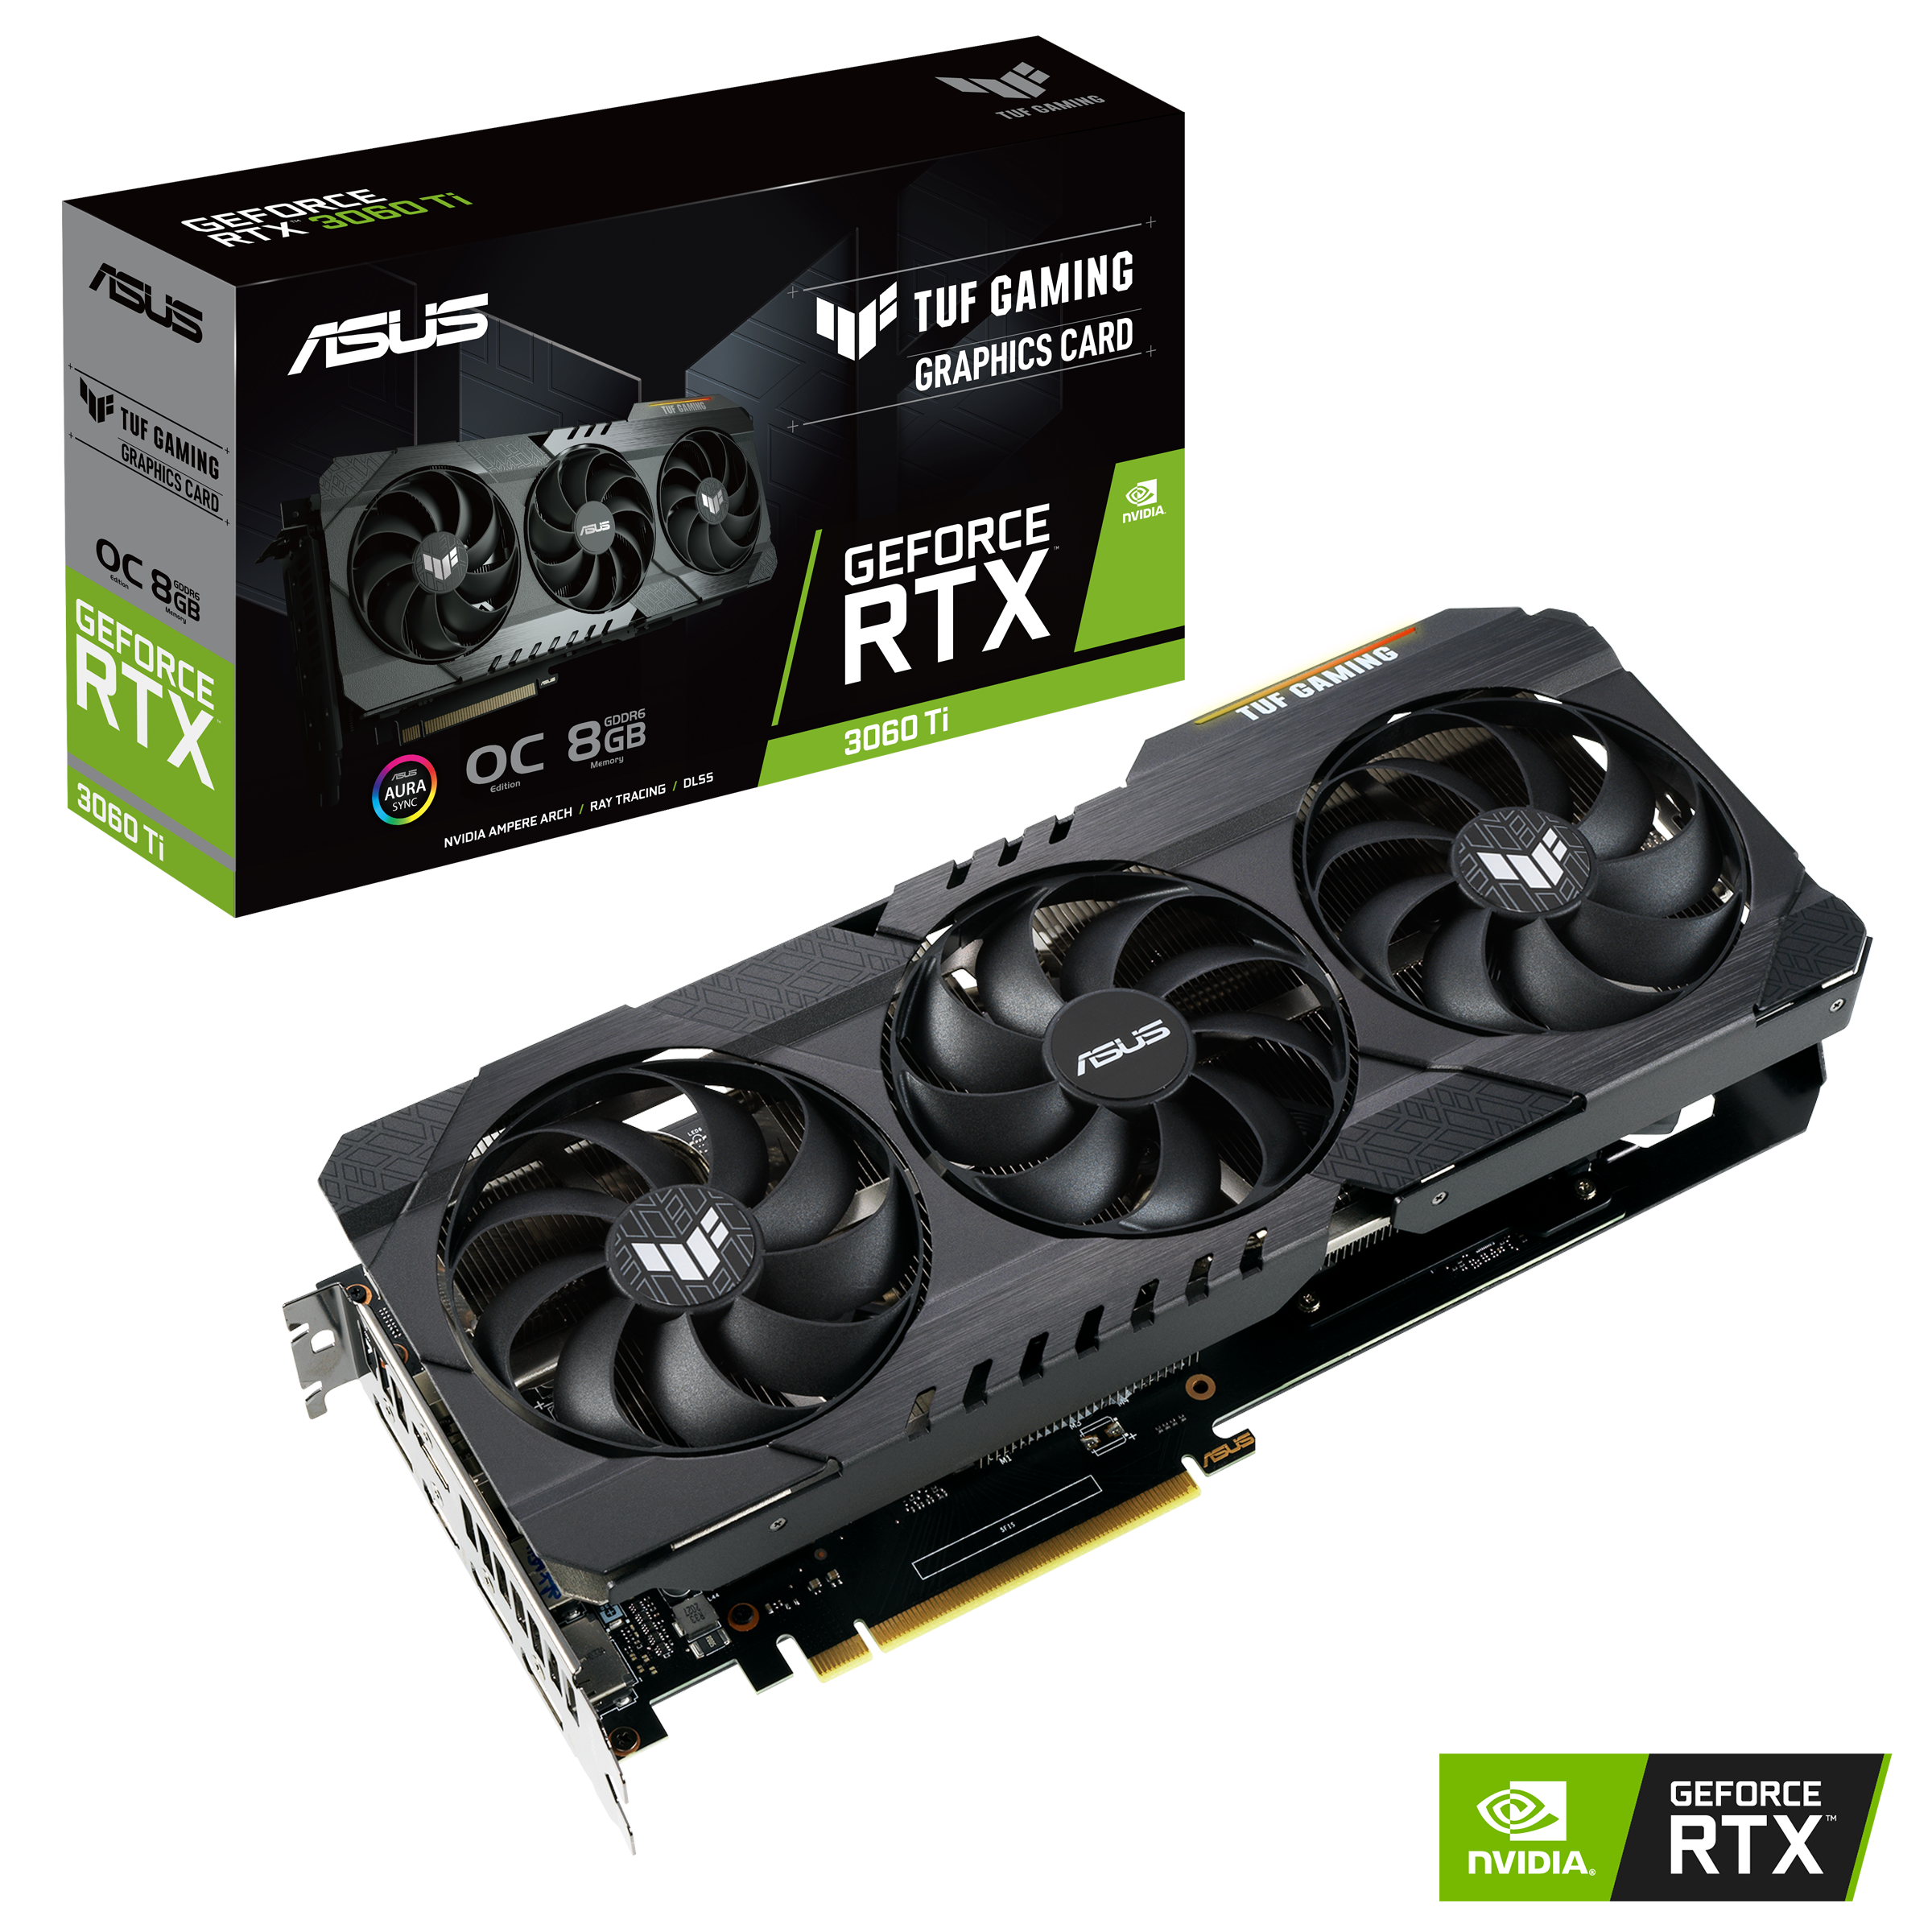 6 Reasons to Avoid a Gigabyte GeForce RTX 3060 Ti Gaming OC D6X 8G